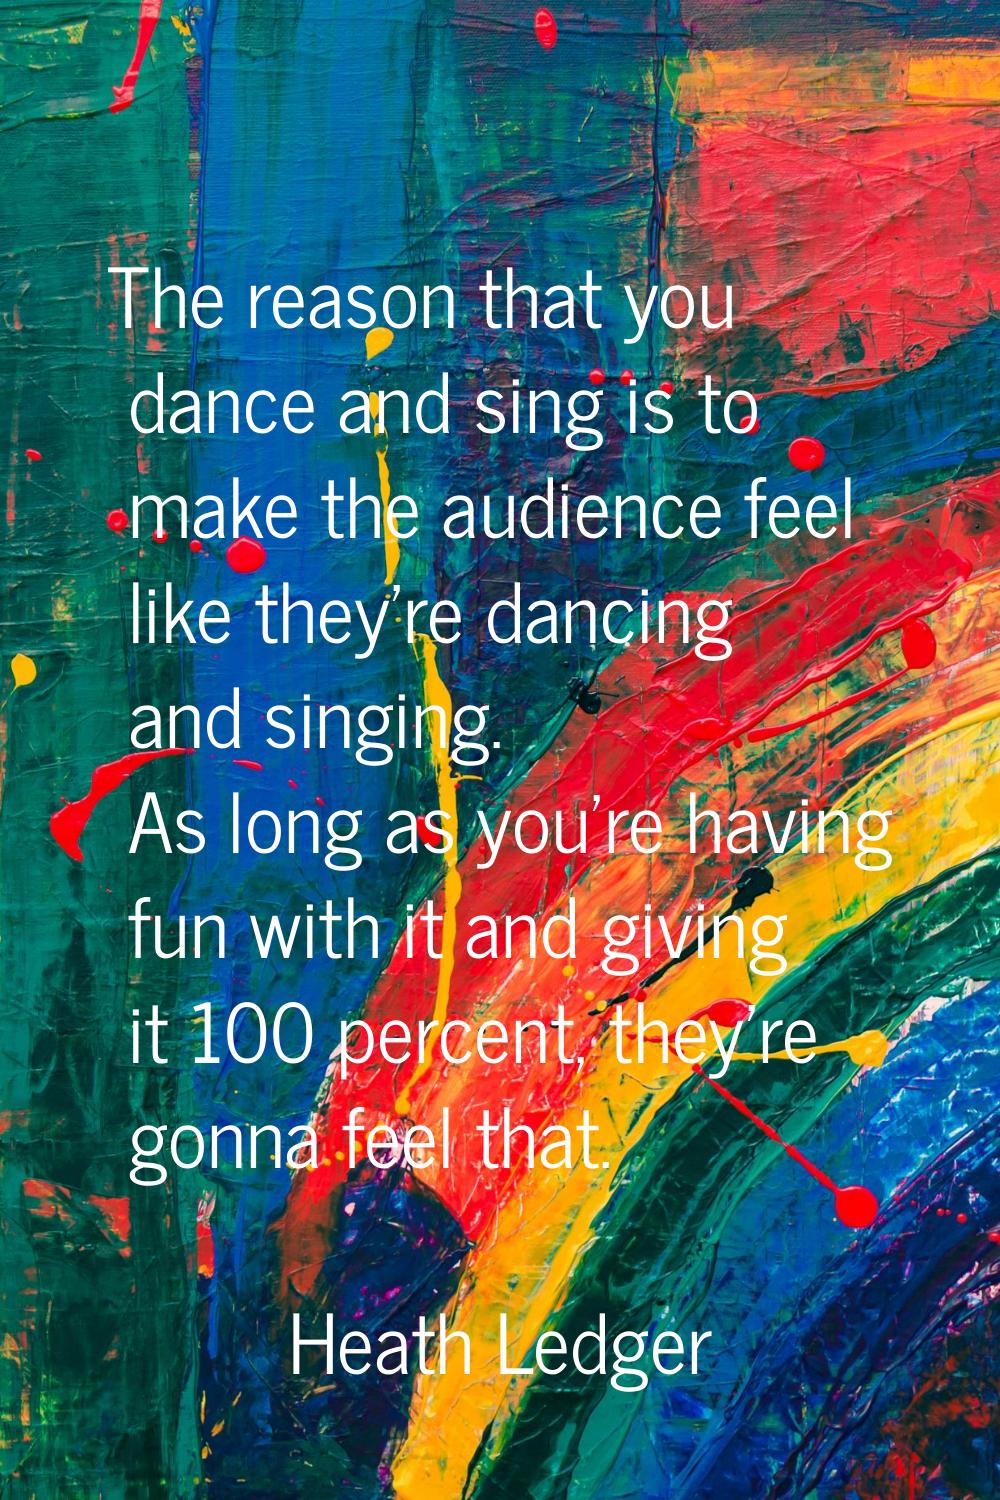 The reason that you dance and sing is to make the audience feel like they're dancing and singing. A